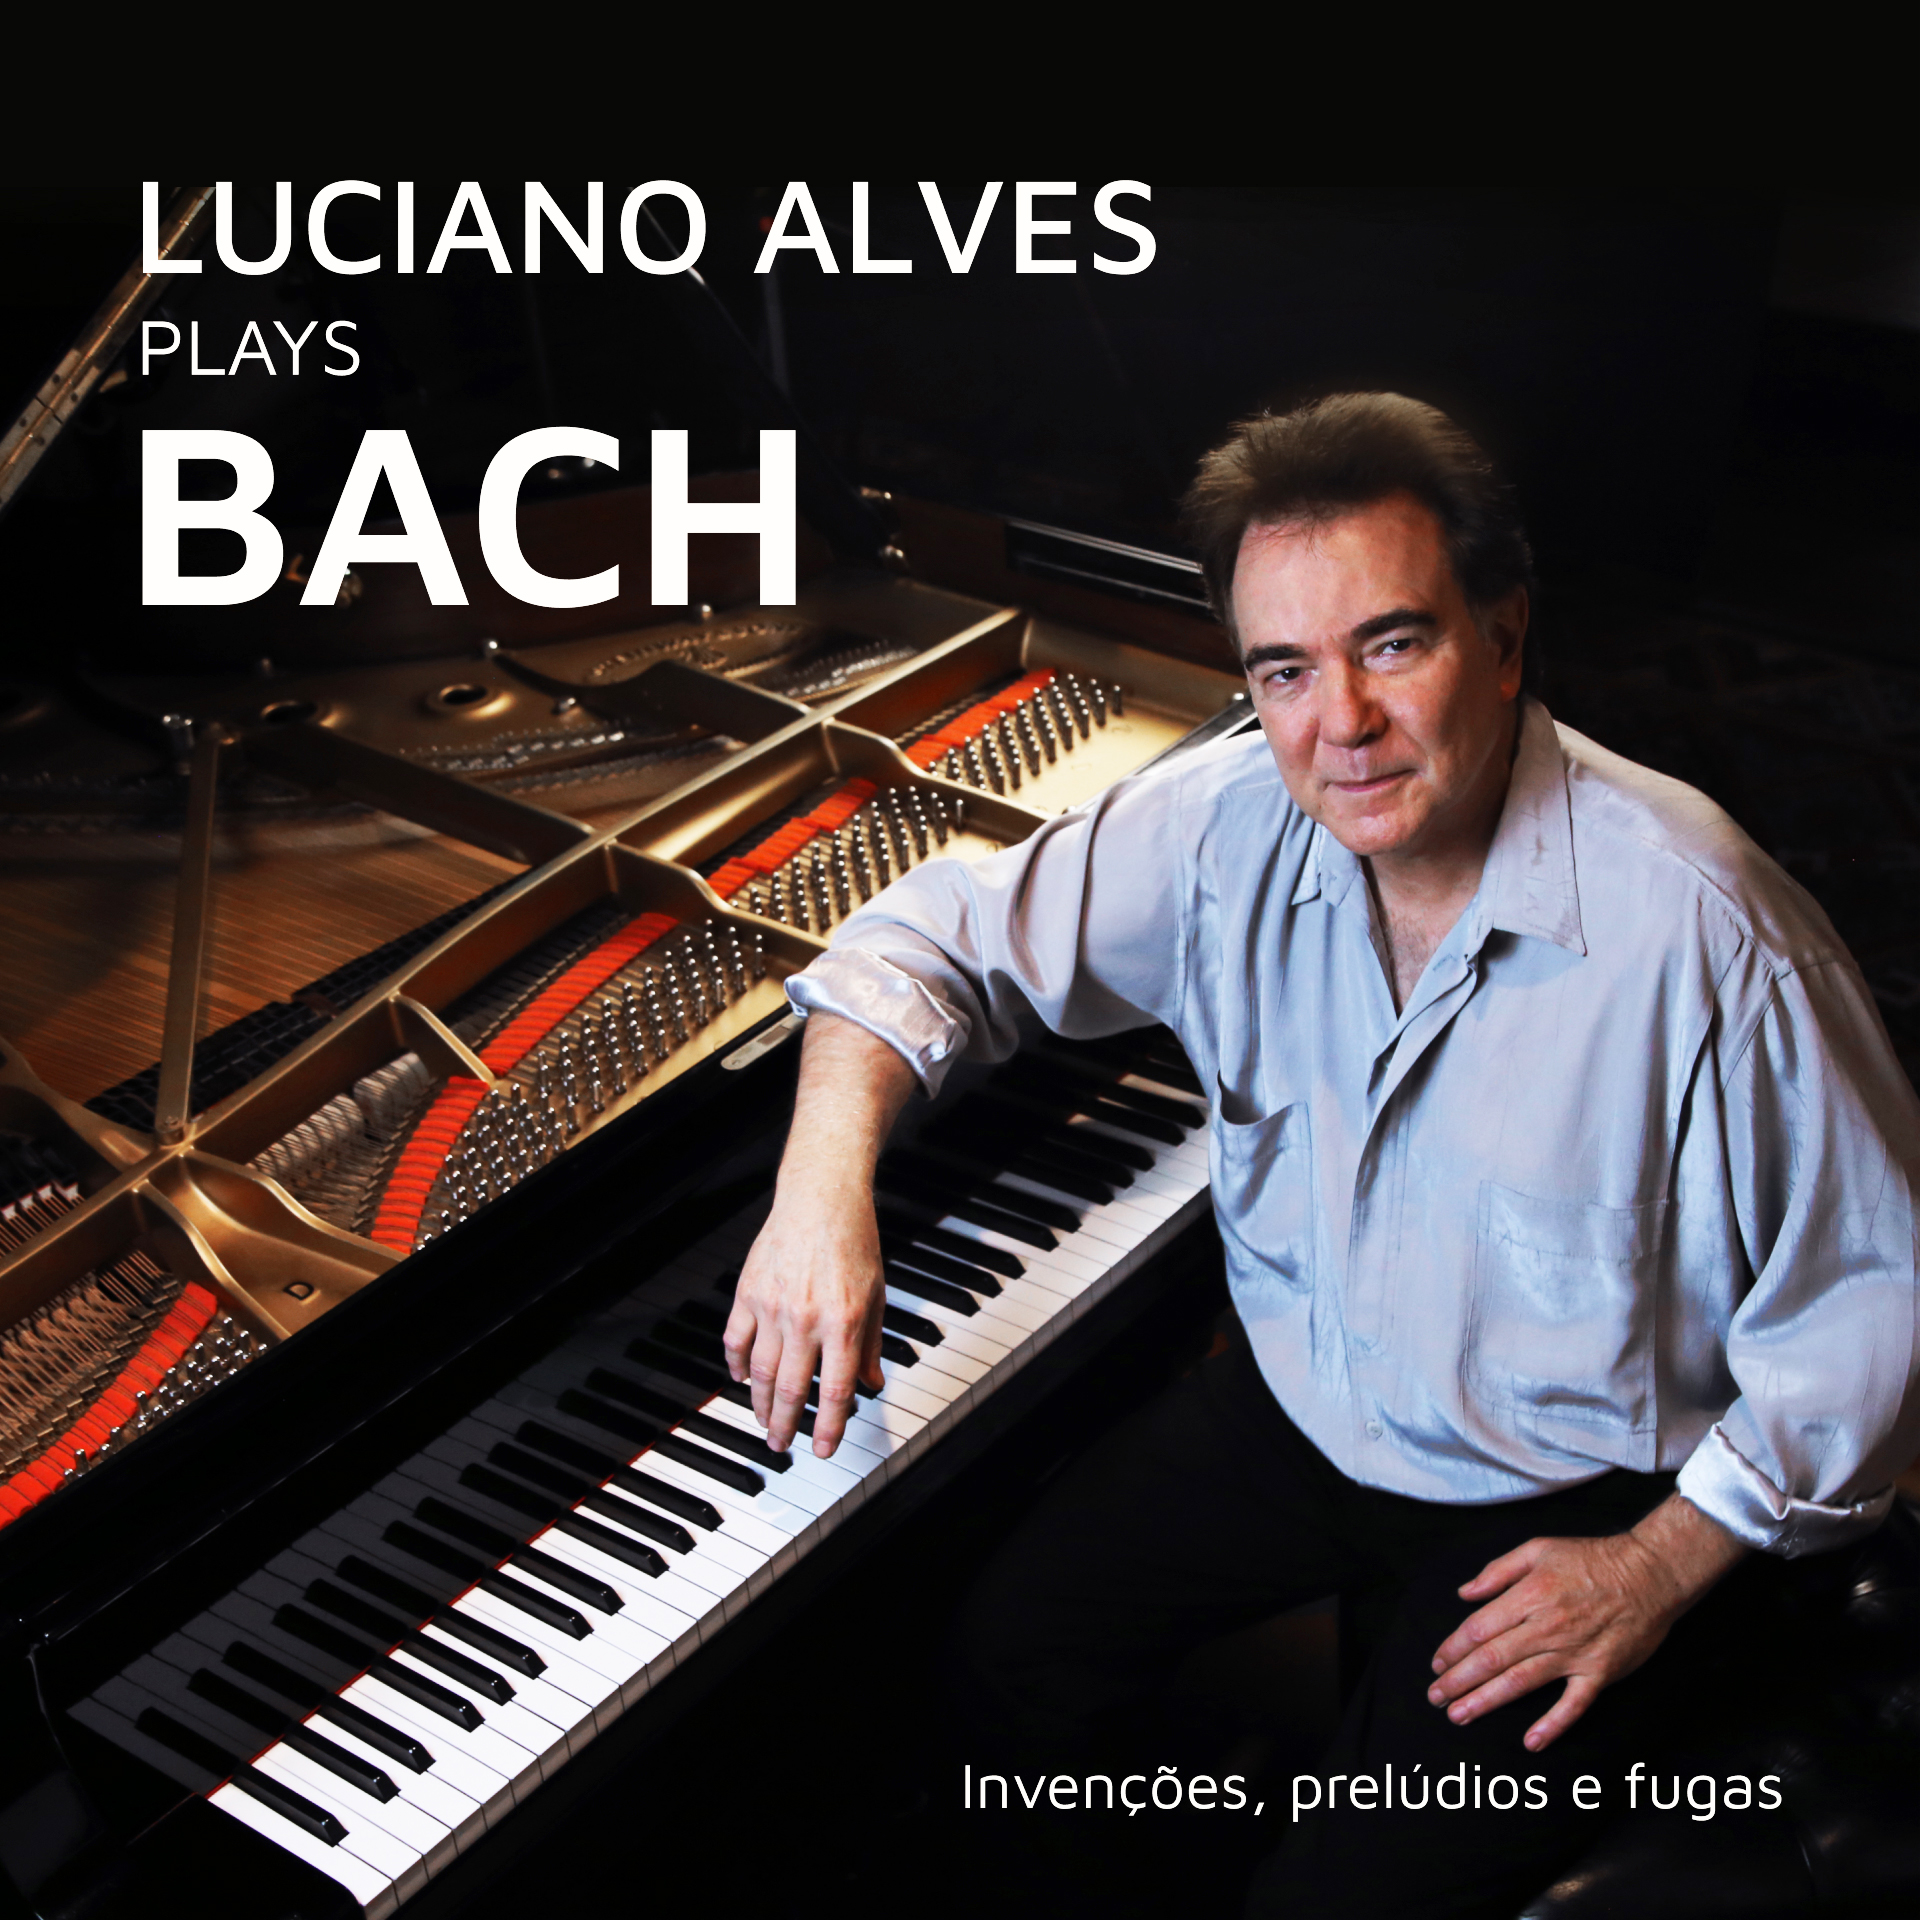 Luciano Alves plays Bach